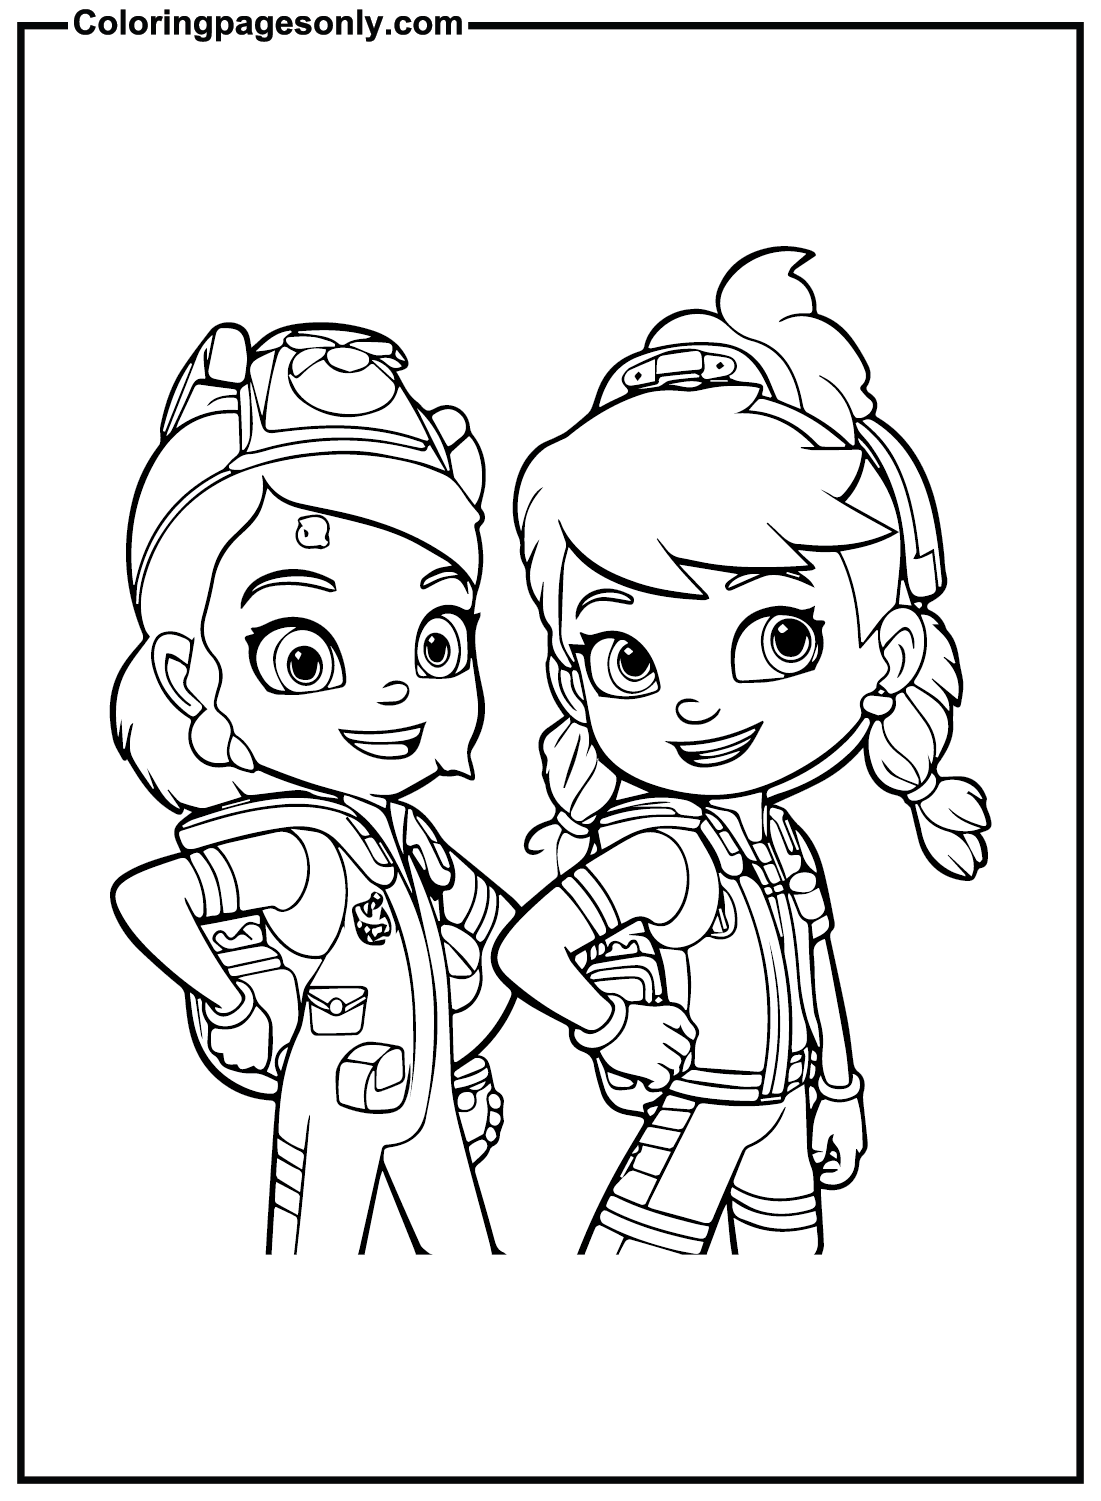 Rainbow Rangers Dolls Coloring Pages